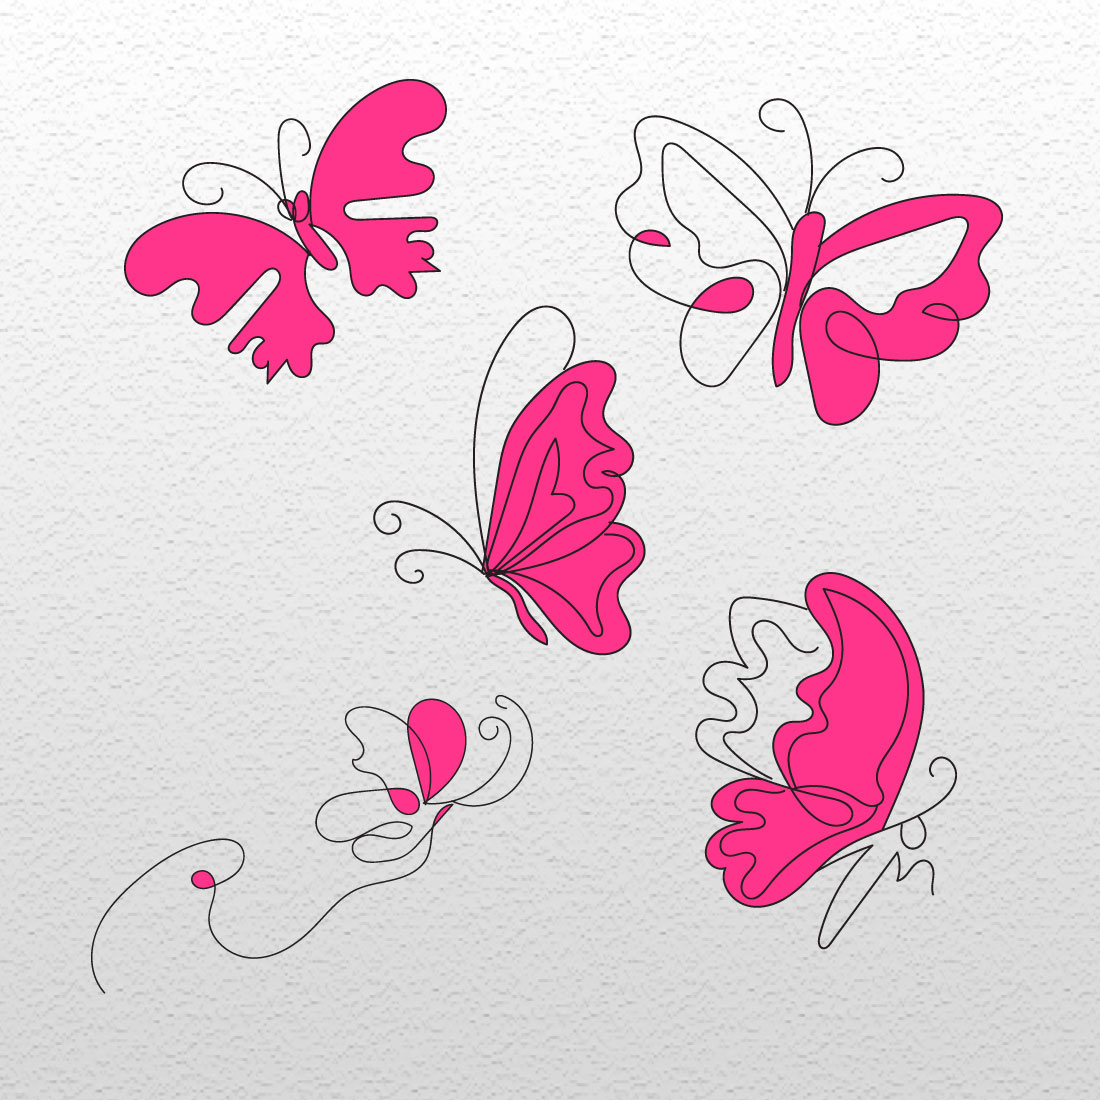 Group of pink butterflies on a white background.